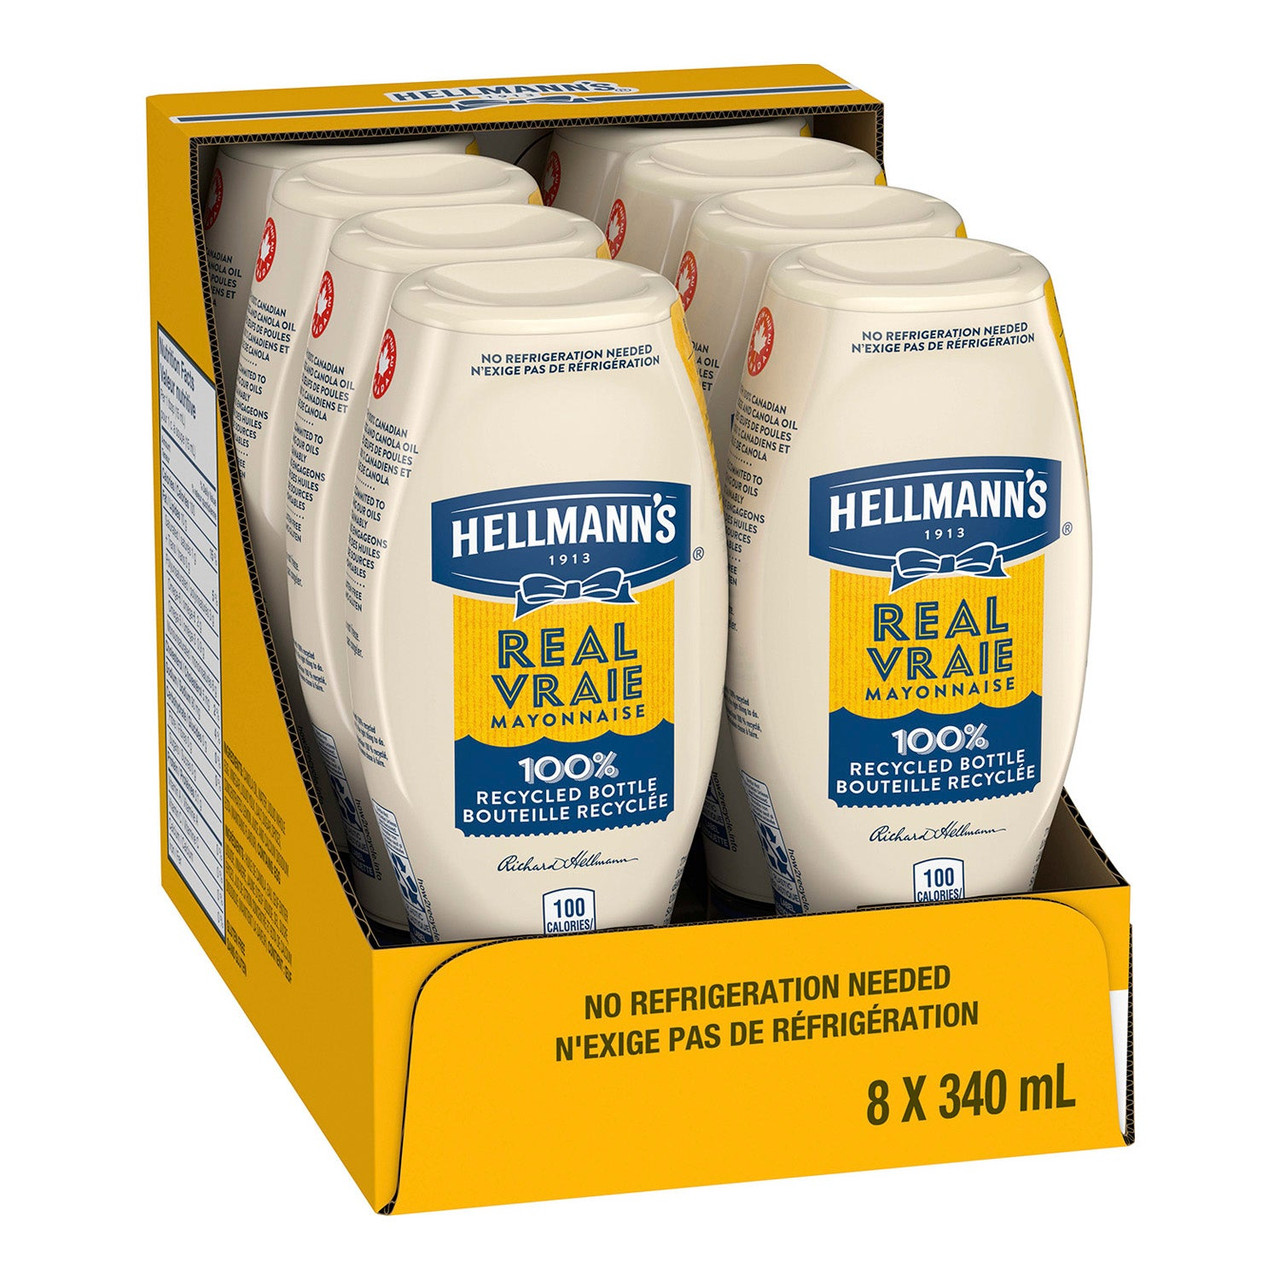 Mayonnaise from Hellmann's in Squeeze Bottles and Jars